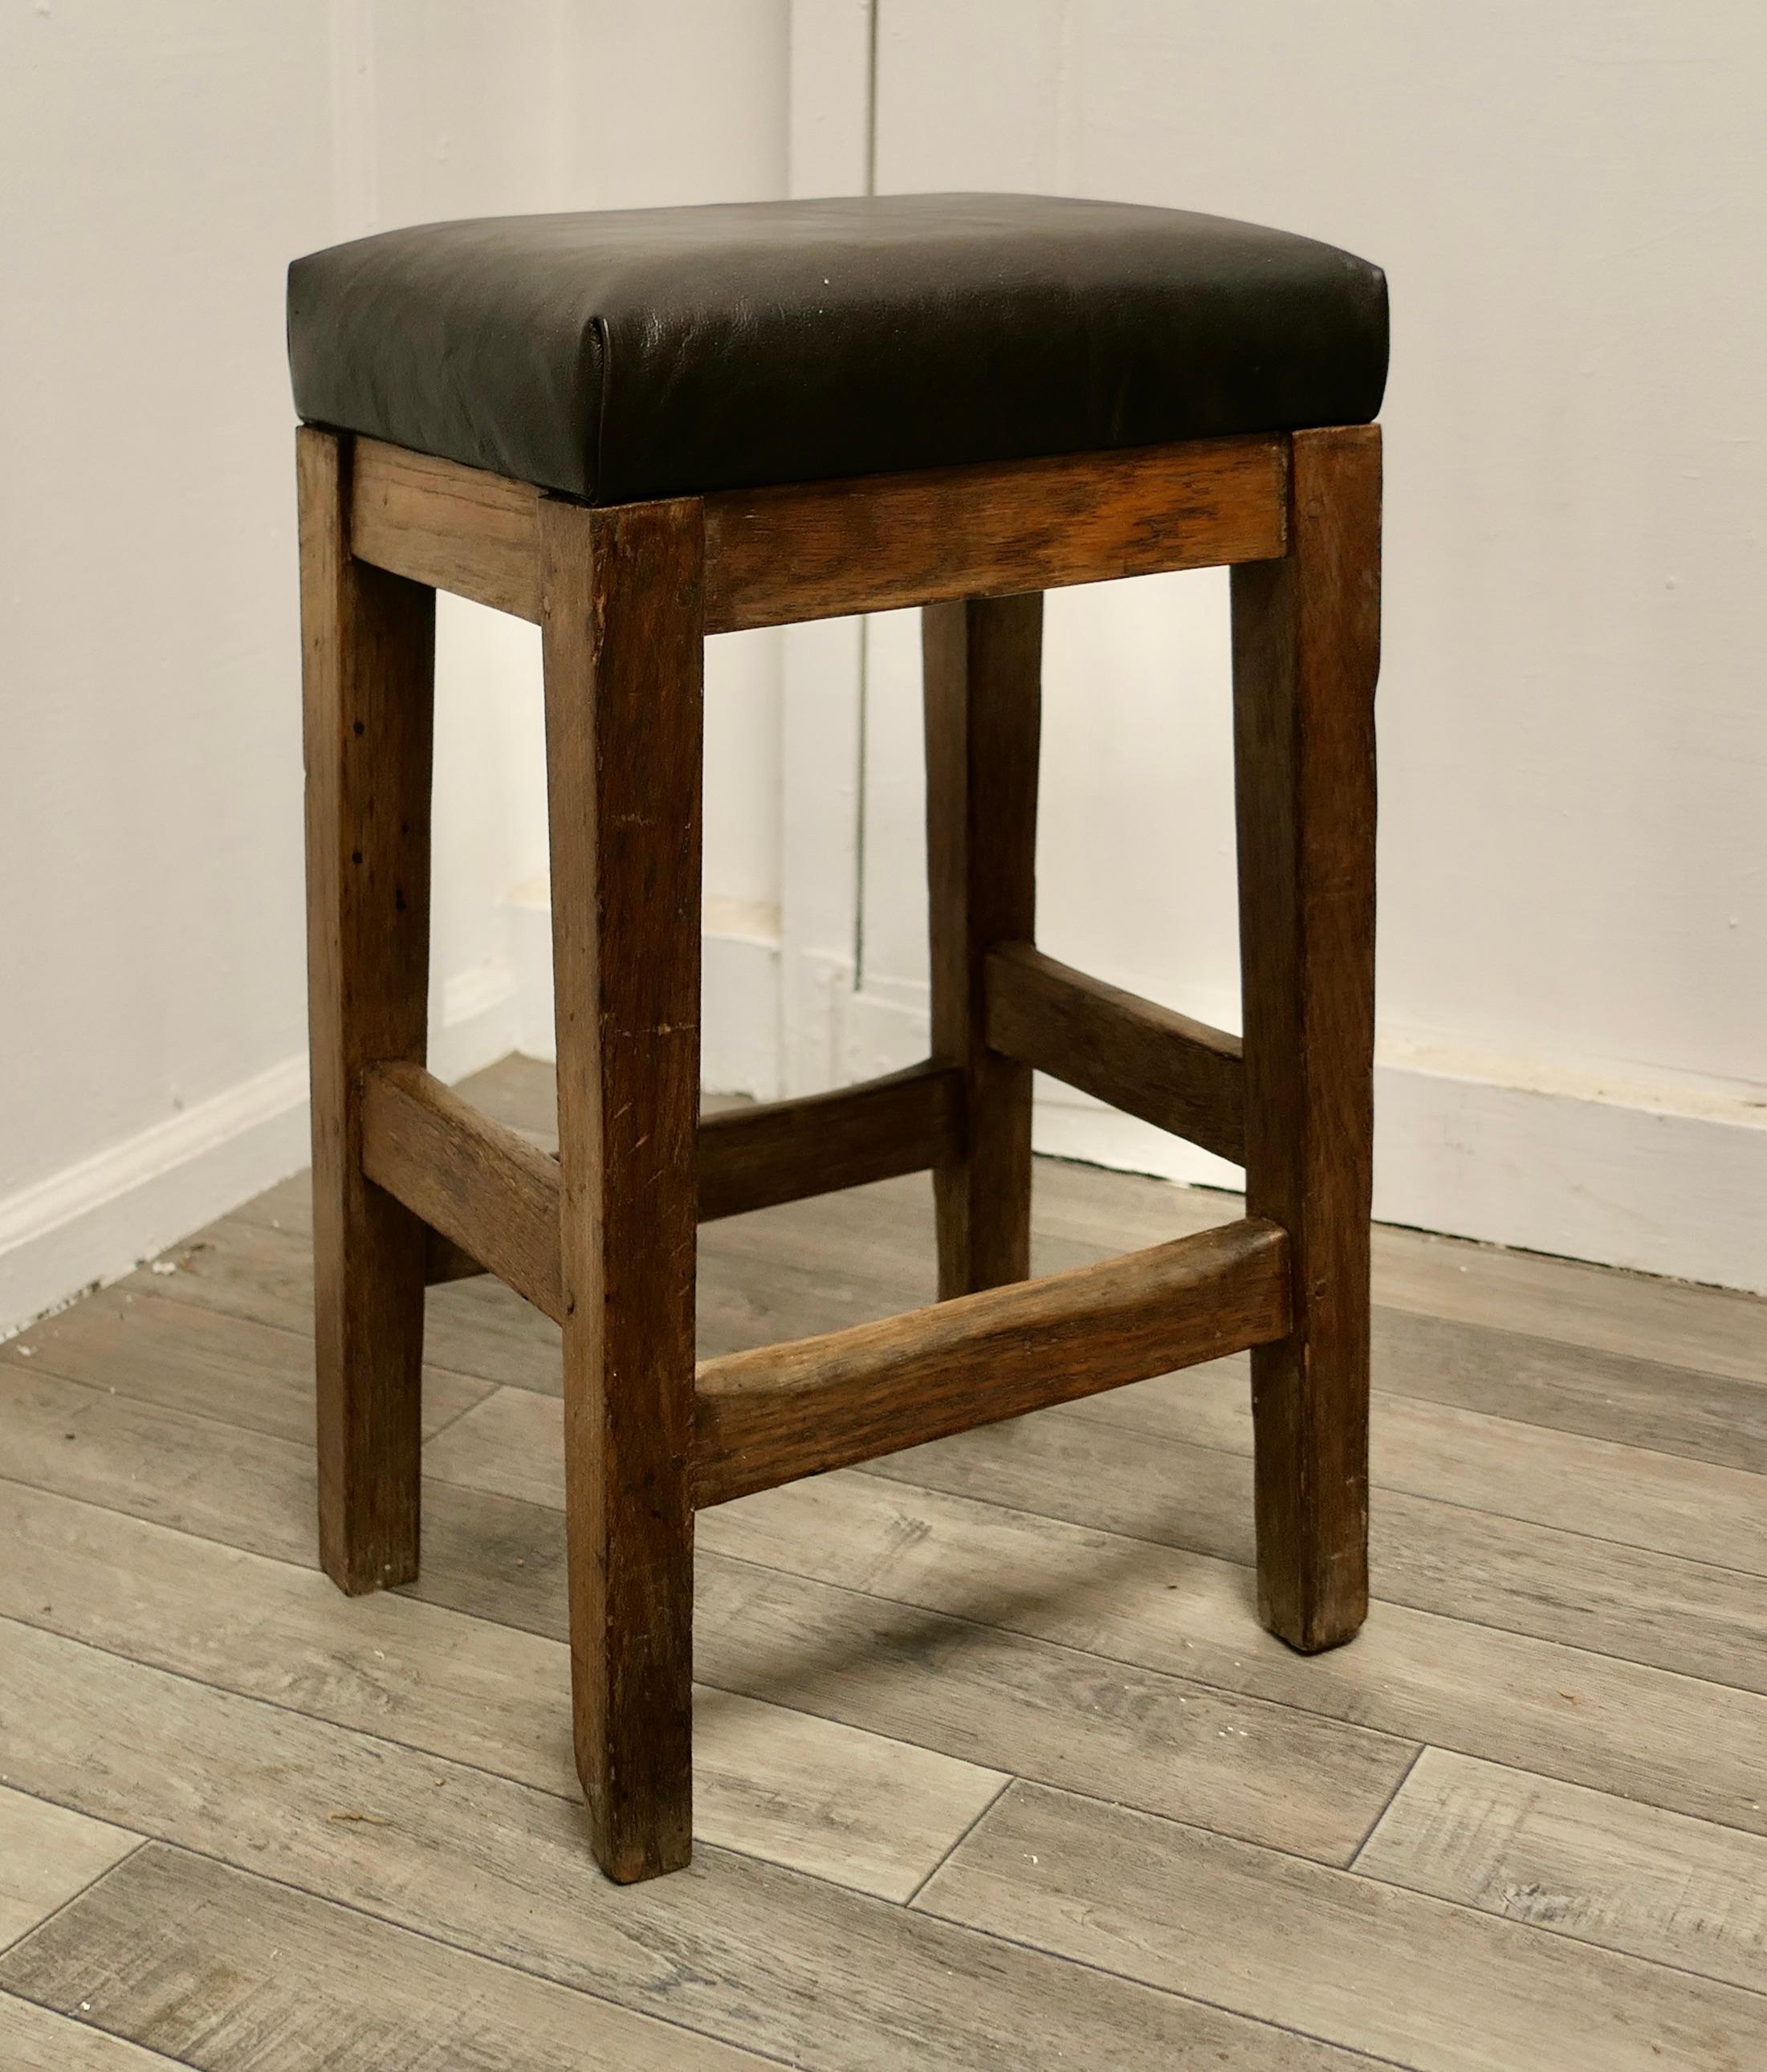 Arts and Crafts Golden Oak and Leather stool

This is a very attractive high stool, it has a square seat and is set on sturdy square stretchered legs, the stool has a soft leather upholstered seat 
The stool is in good sound condition, and has a